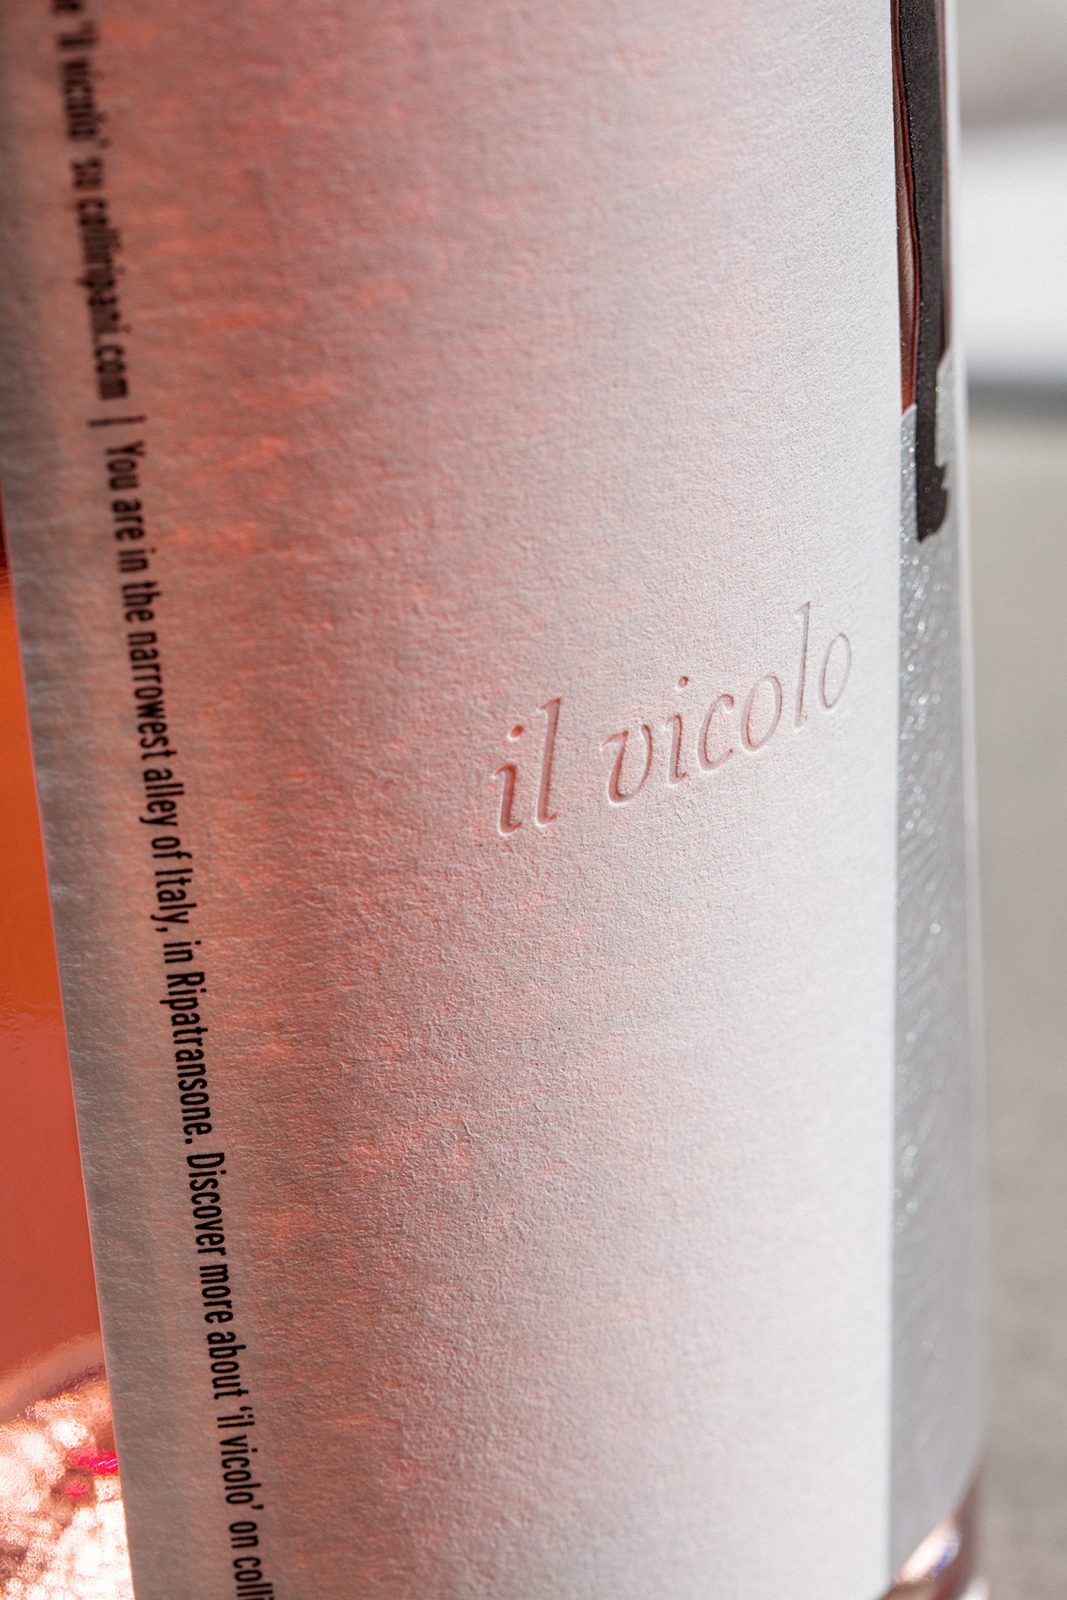 Awarded il vicolo Wine Label Design With Spectacular Details by Andrea Castelletti